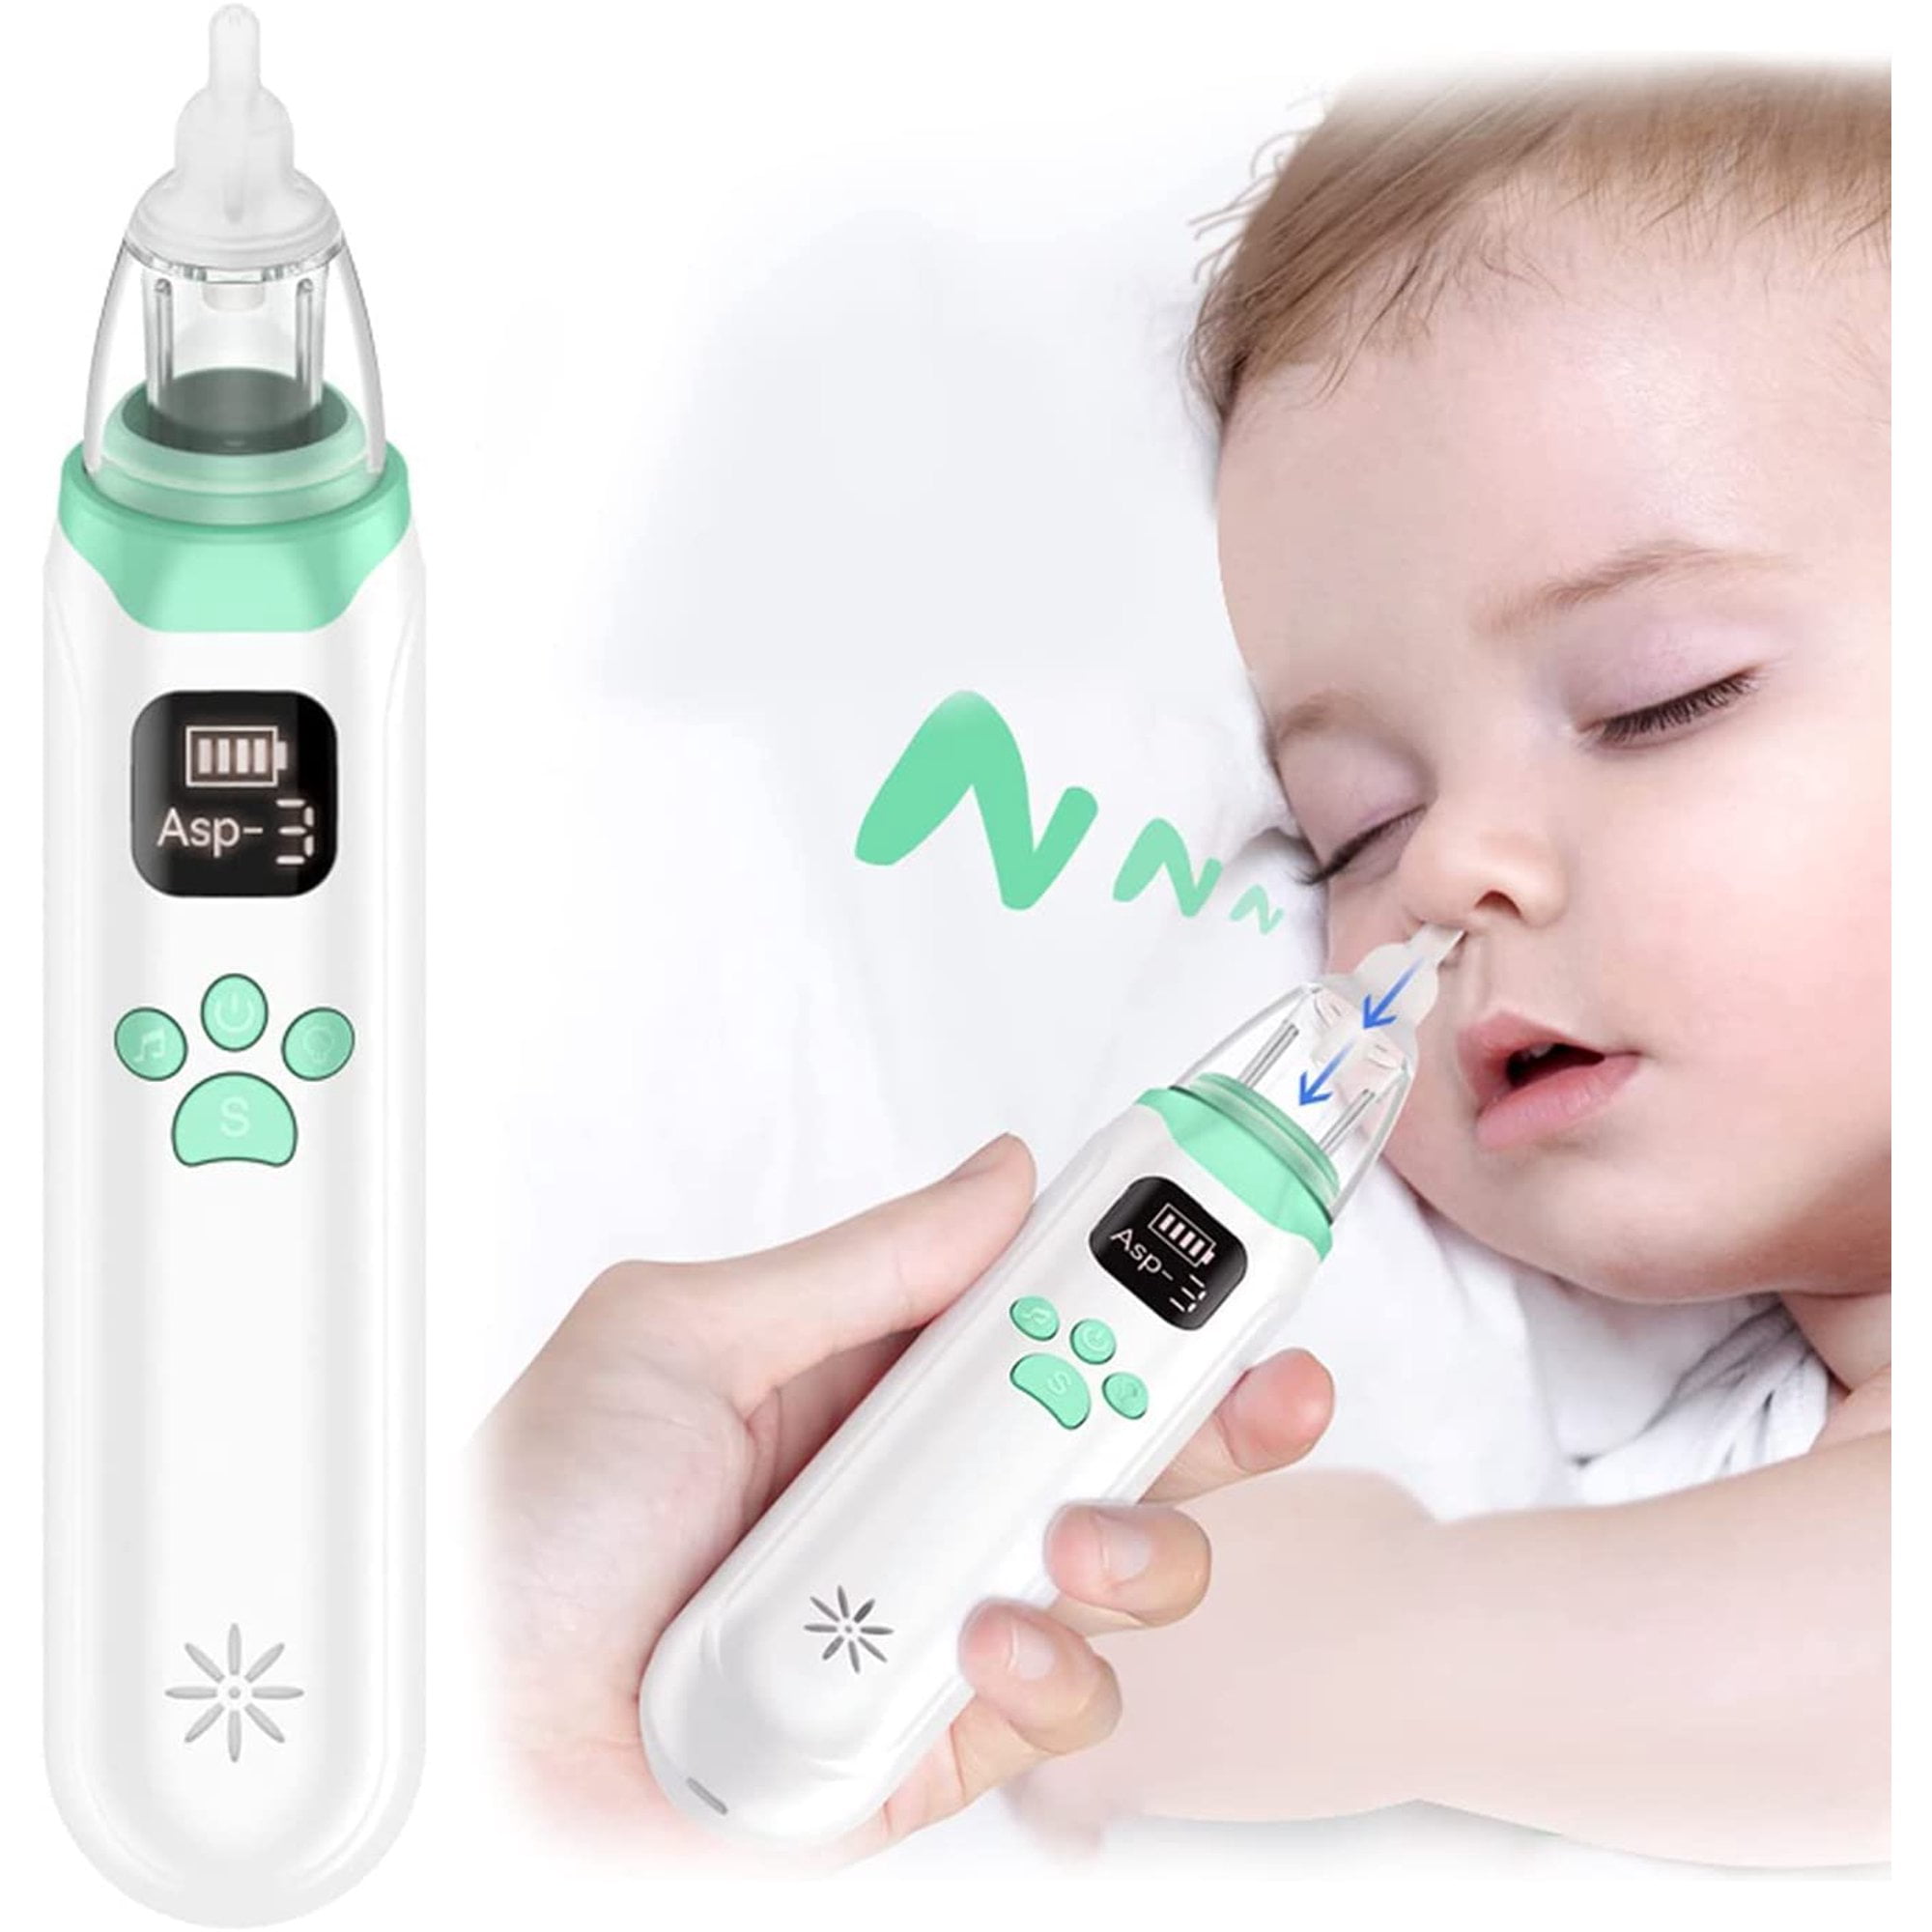 Baby Nasal Aspirator with 24 Hygiene Filters, Snot Sucker for Baby, Straw  for Stuffy Nose- Non-toxic, Cleanable and Reusable Reviews